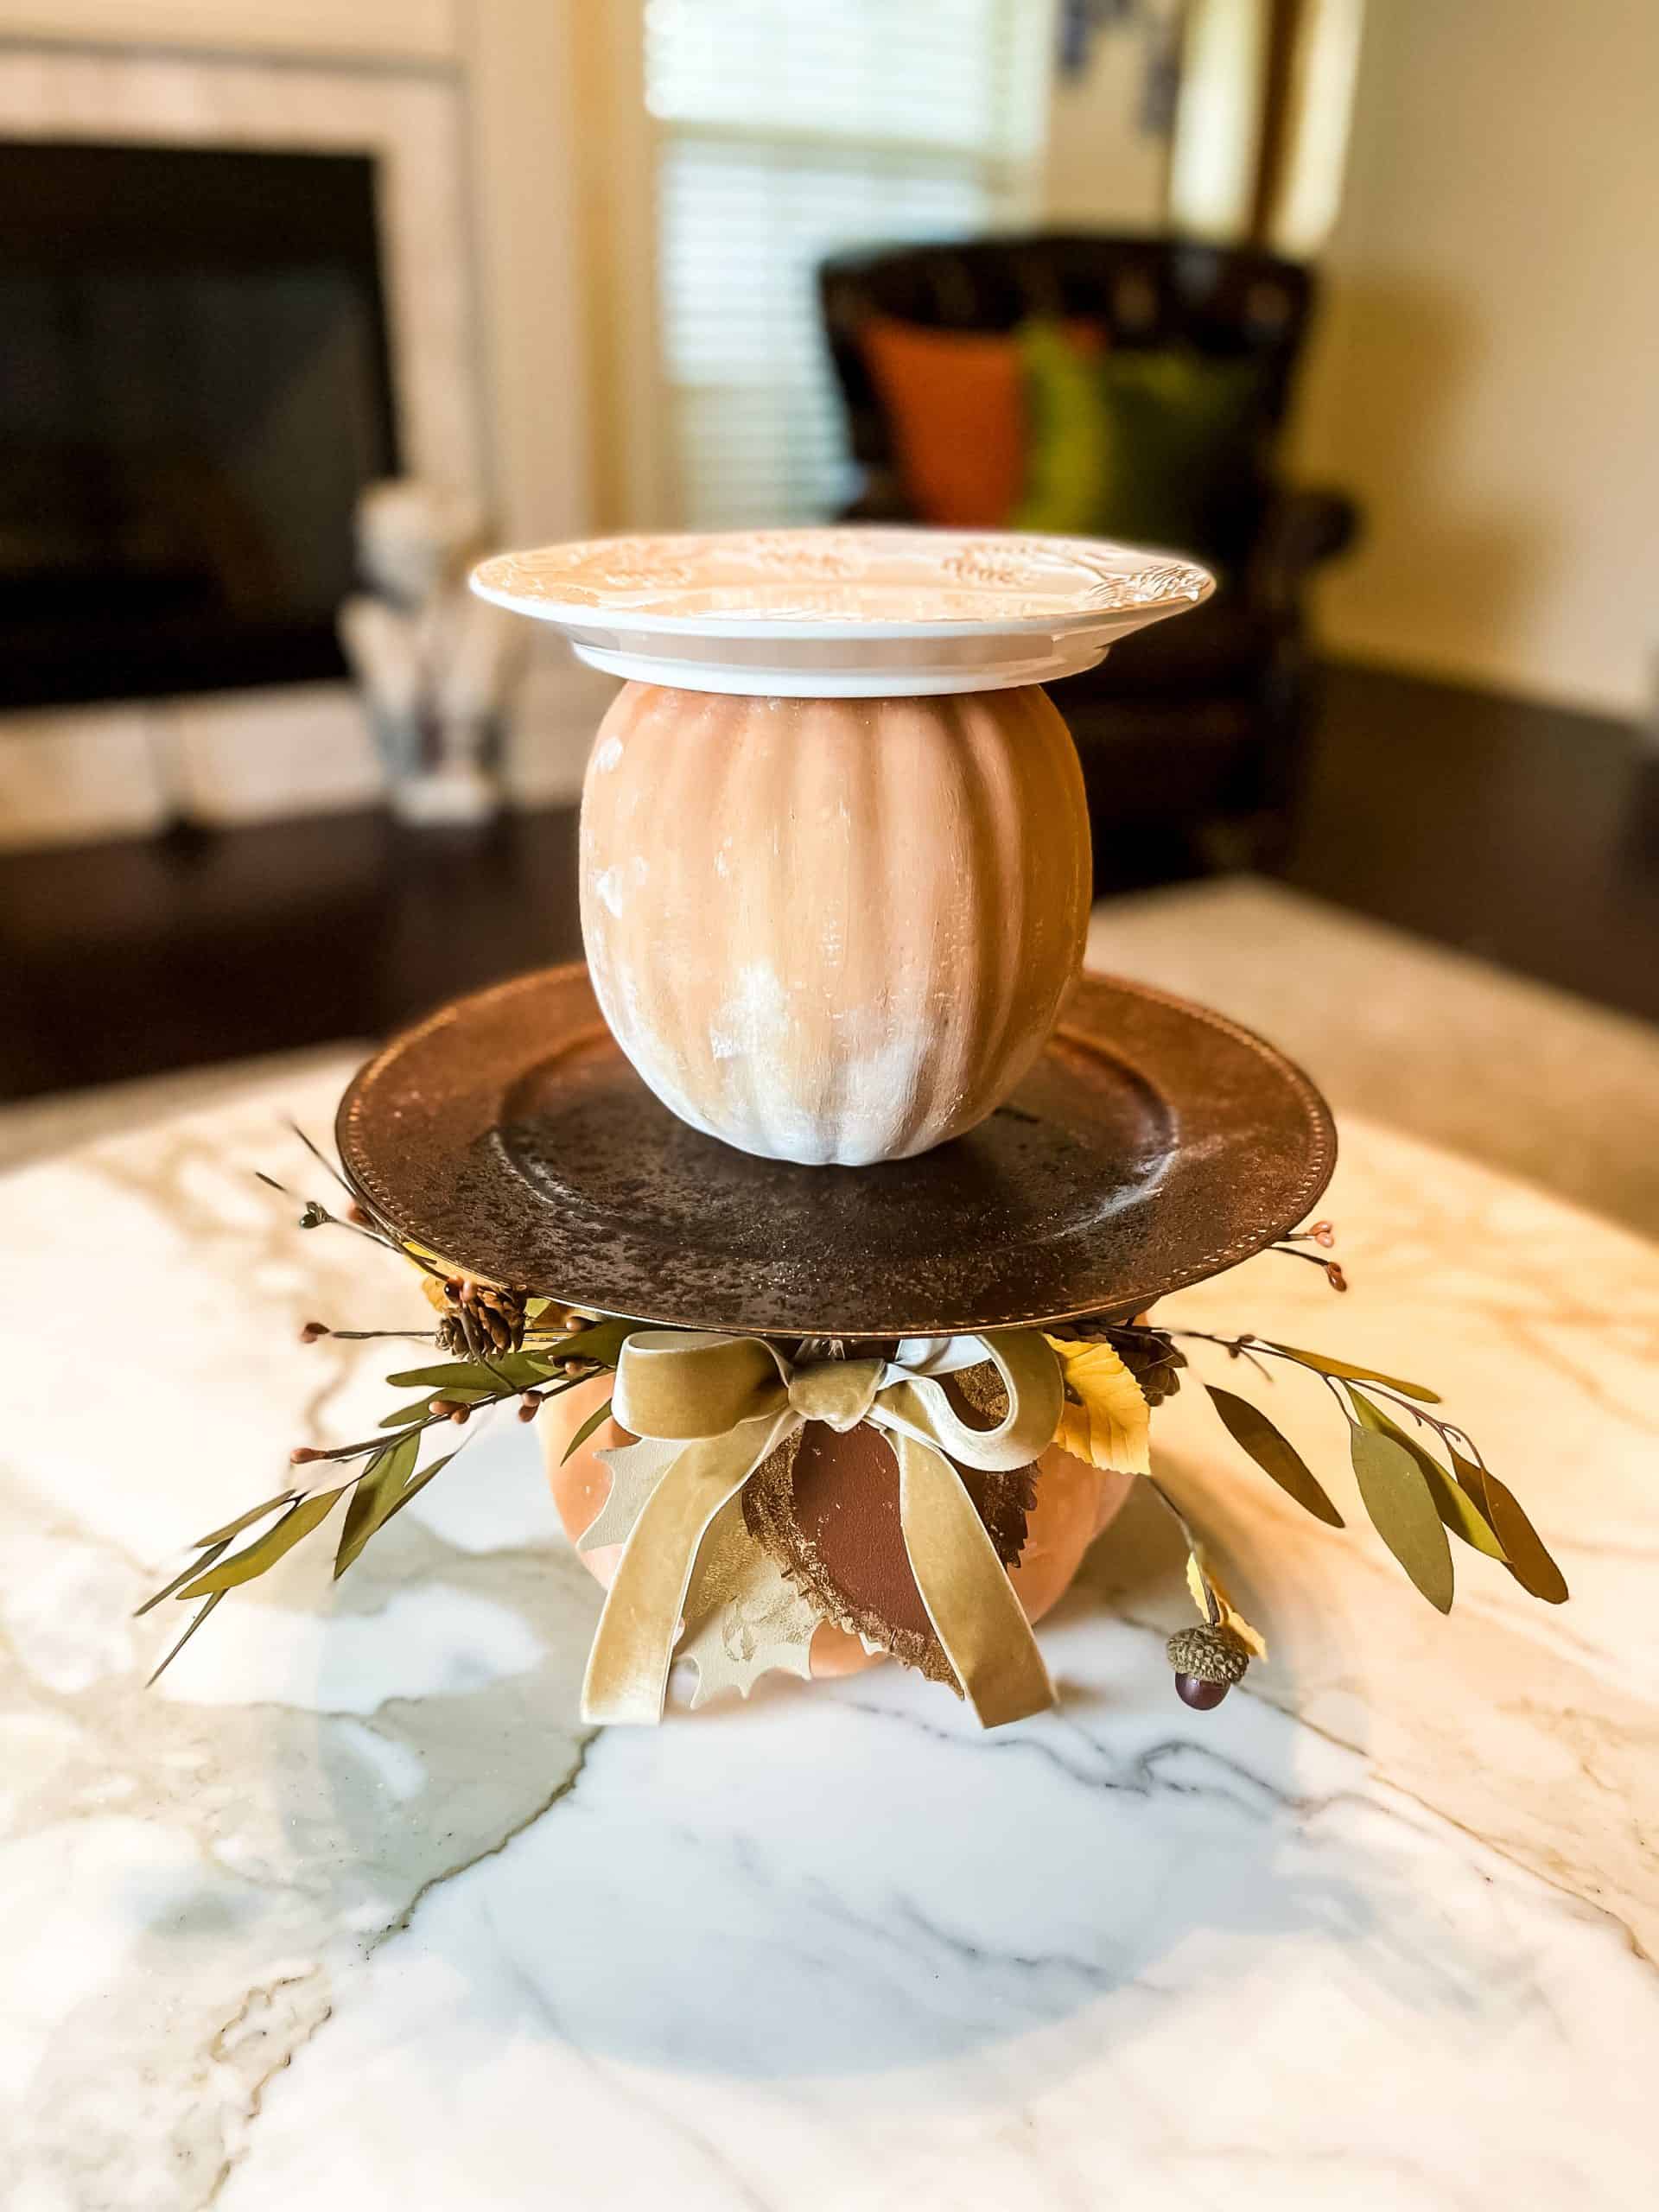 How to Make a Tiered Tray Using Pumpkins